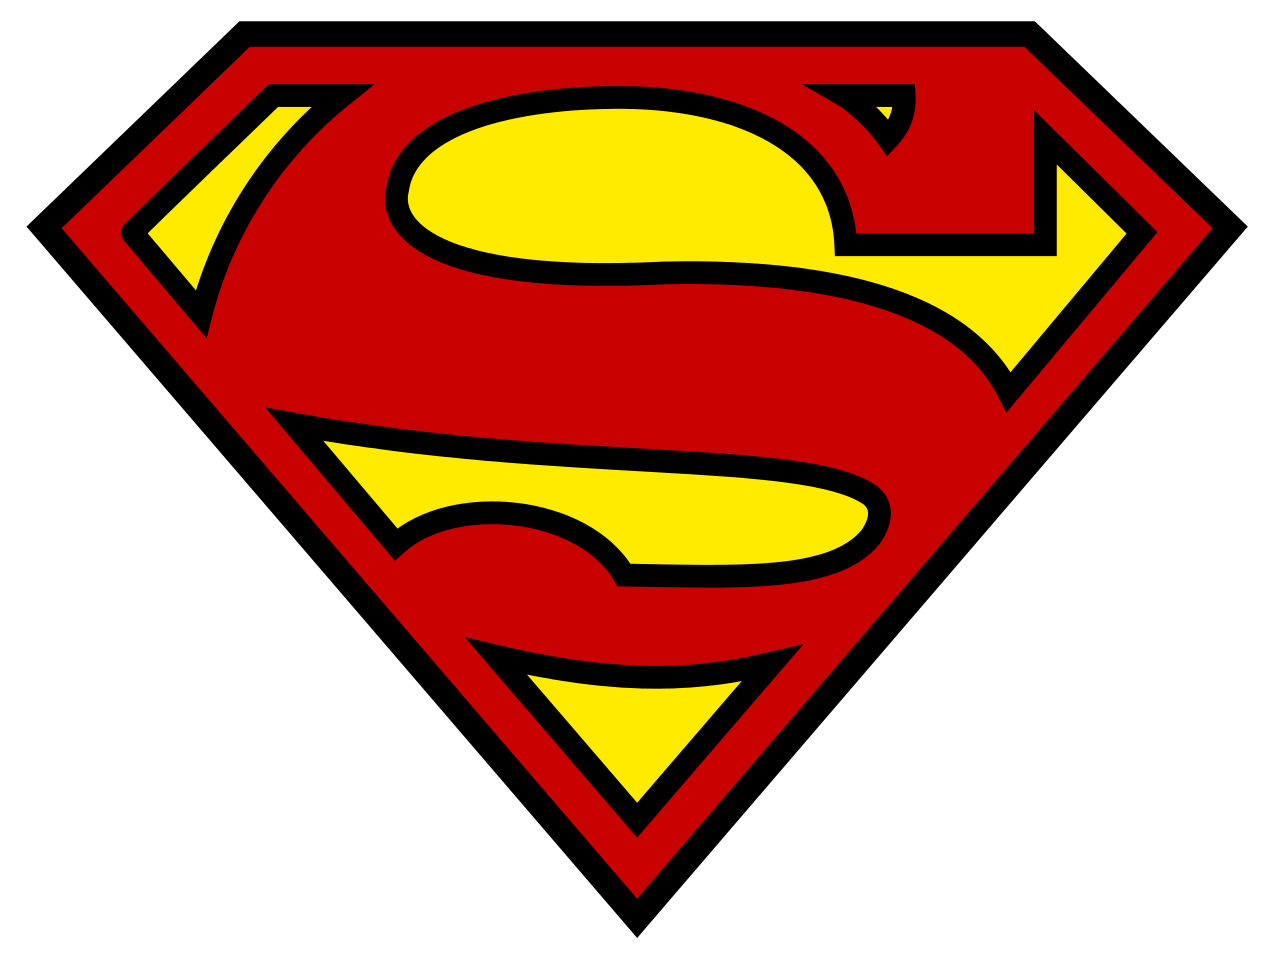 The superman logo is a diamond shaped polygon with an “S” in it.